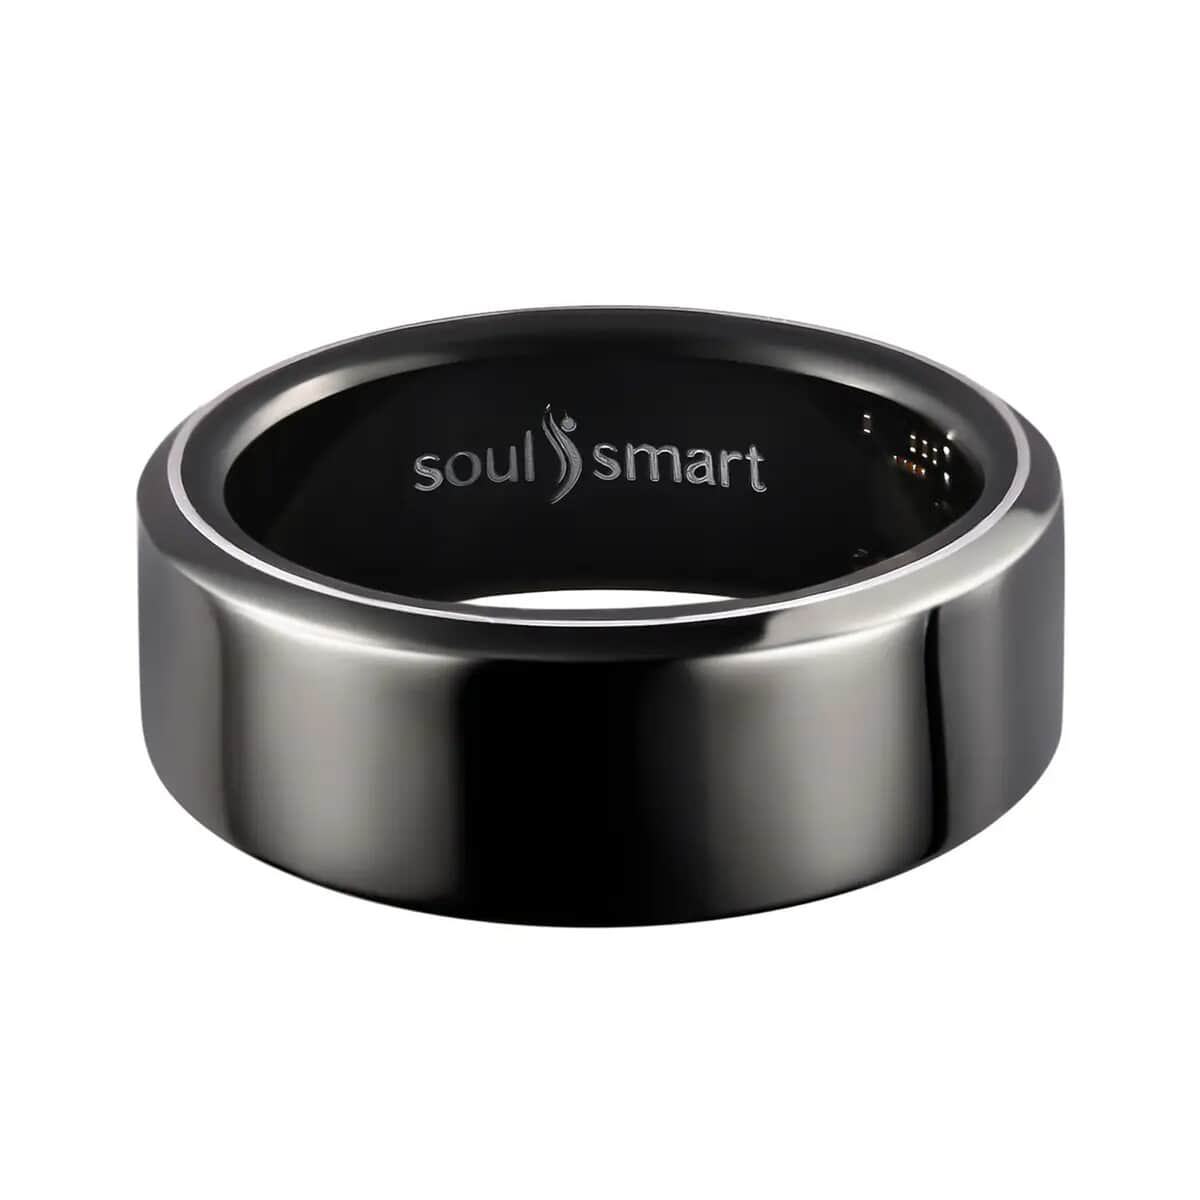 Soulsmart Multifunctional Health Tracker Smart Ring (Size 7.0) in ION Plated Black Stainless Steel (Compatible with Android 5.0+ & Apple IOS 10.0+ Systems) (Del. in 10-15 Days) image number 2